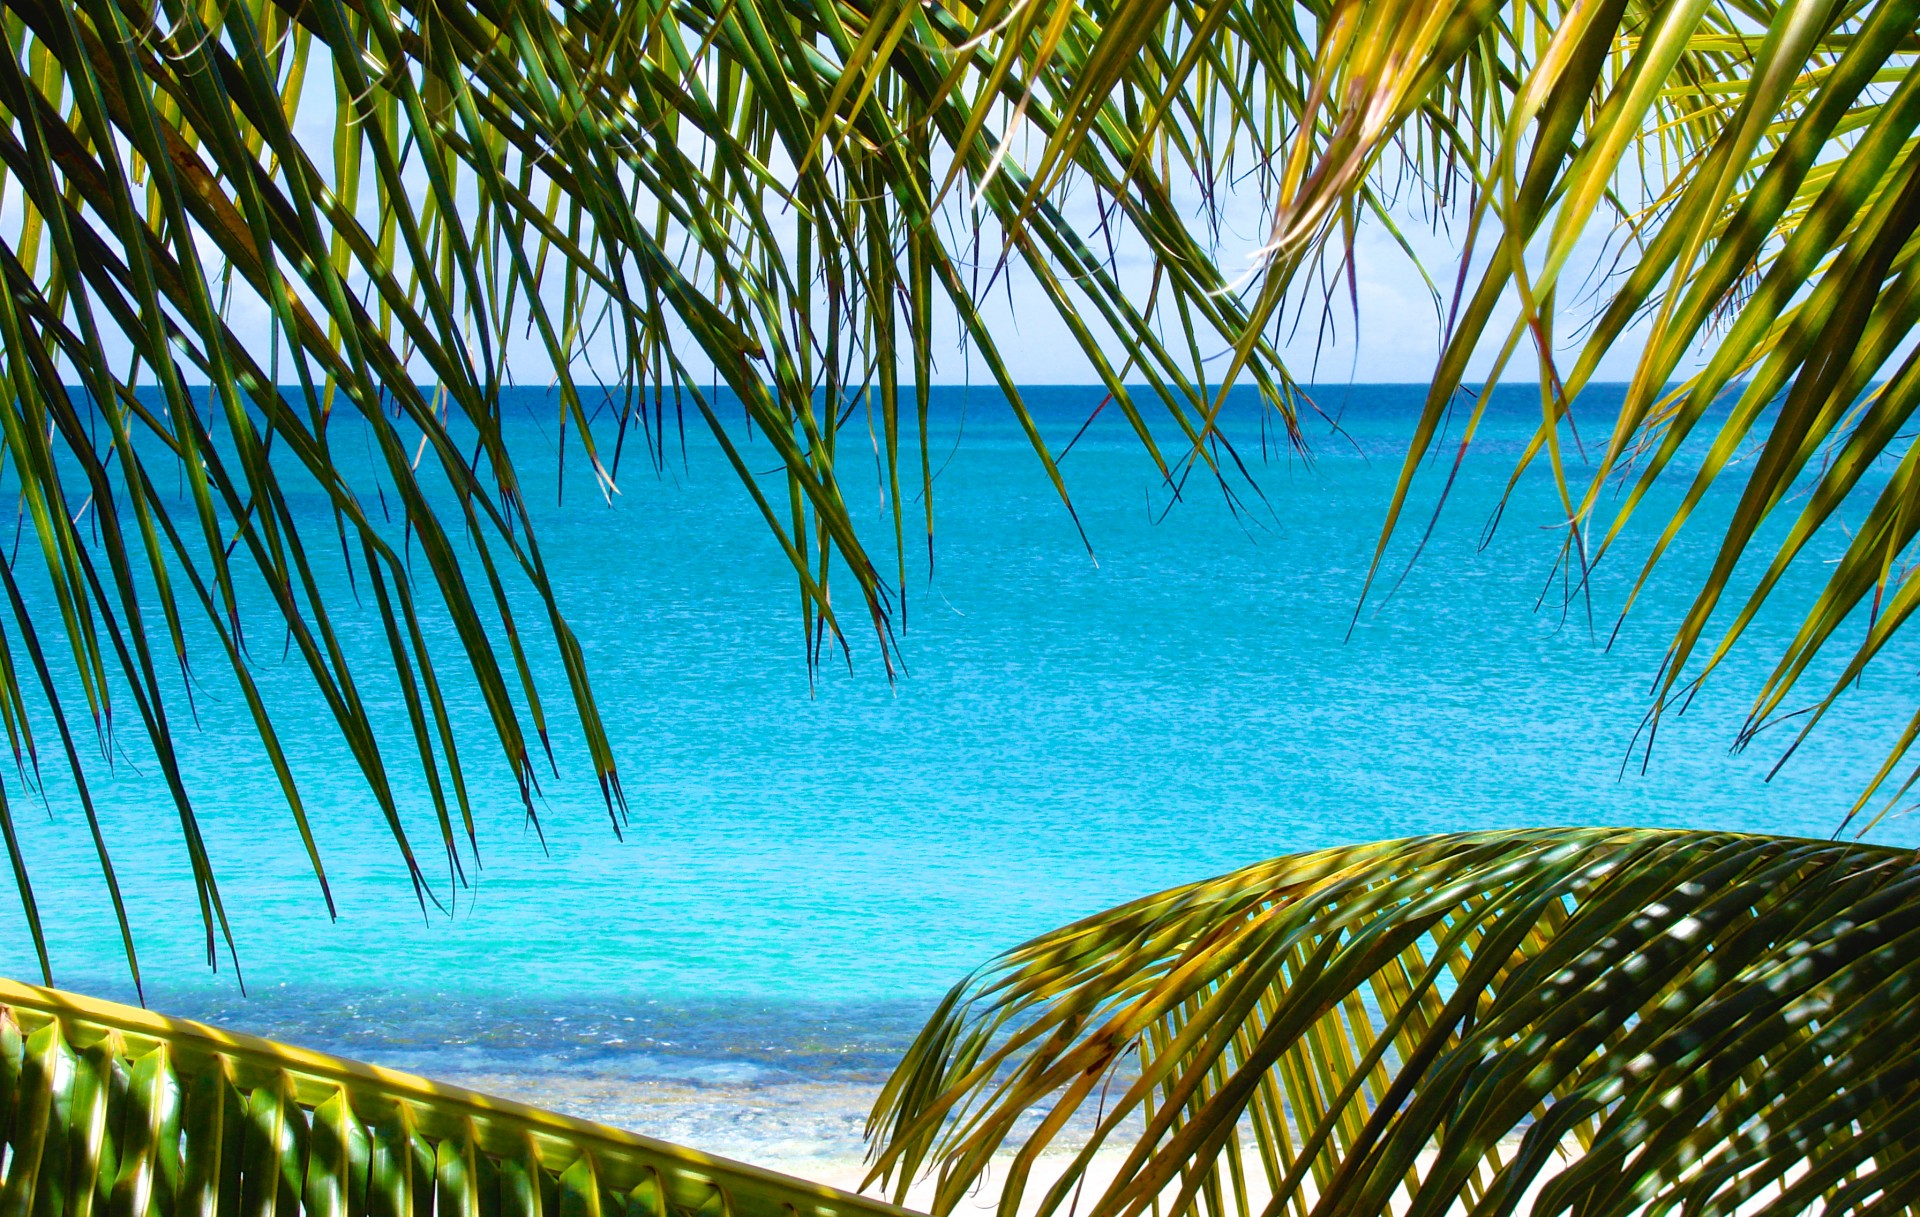 View of Caribbean Sea through green palm fronds.